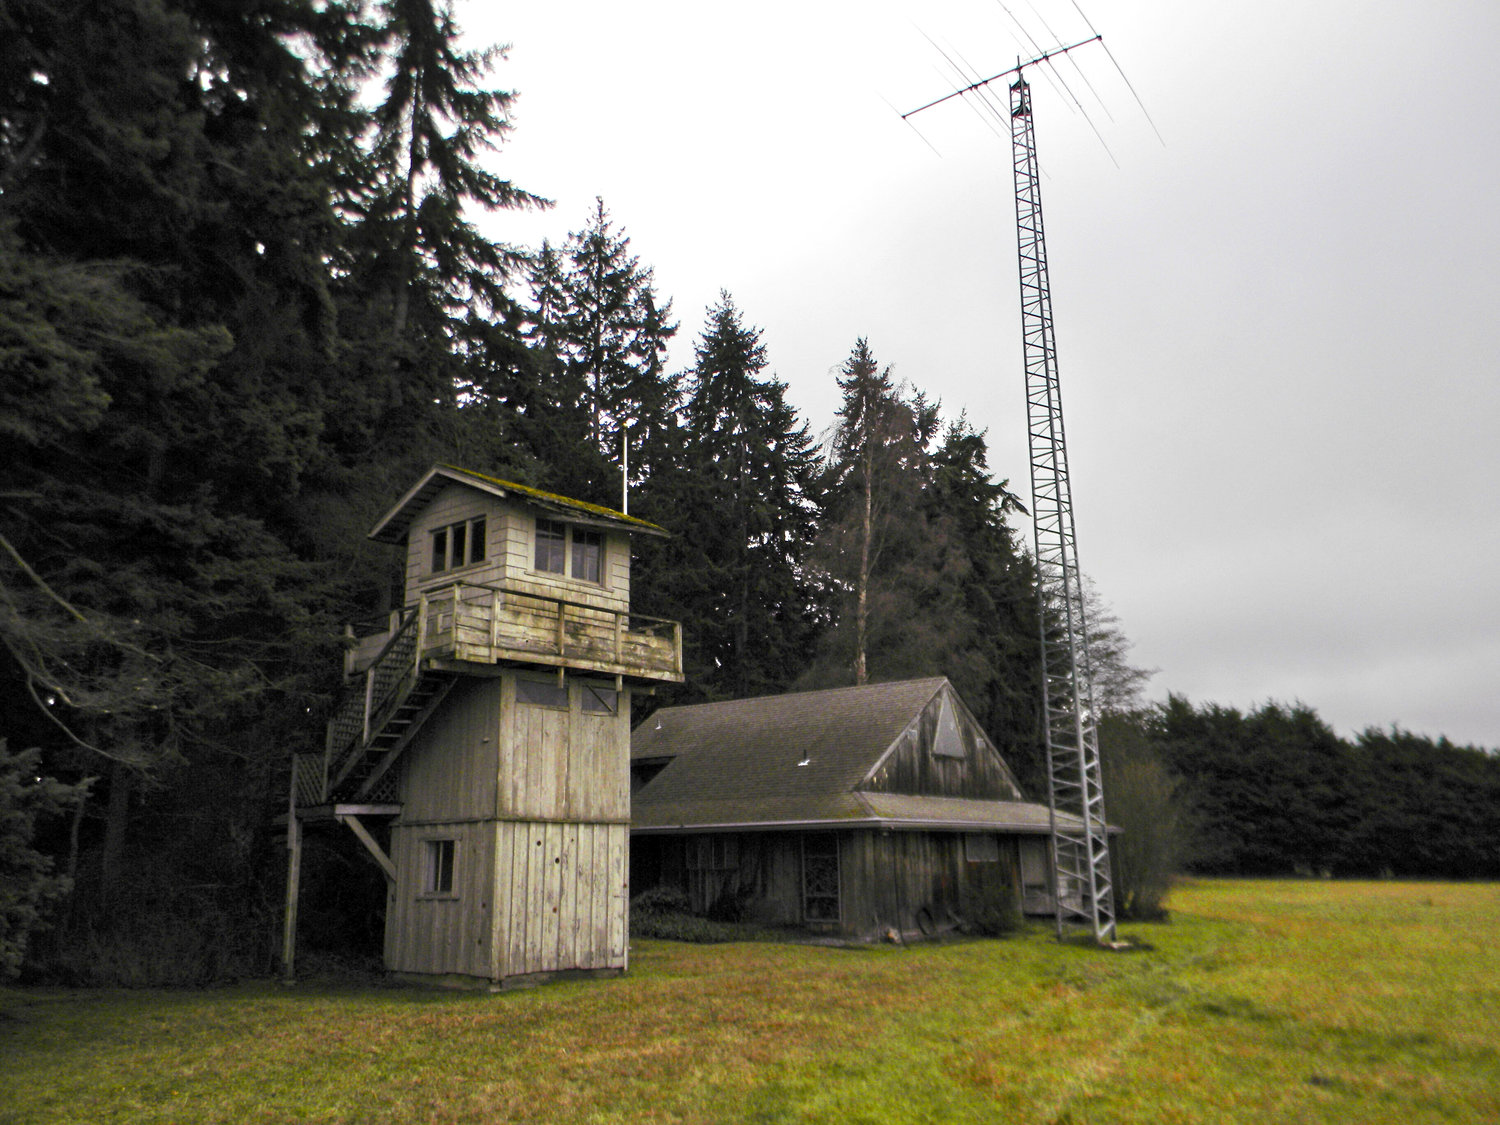 An Aircraft Warning System observation tower in Clallam County, now on private property, seen in a 2014 photo taken by Jon Roanhaus.